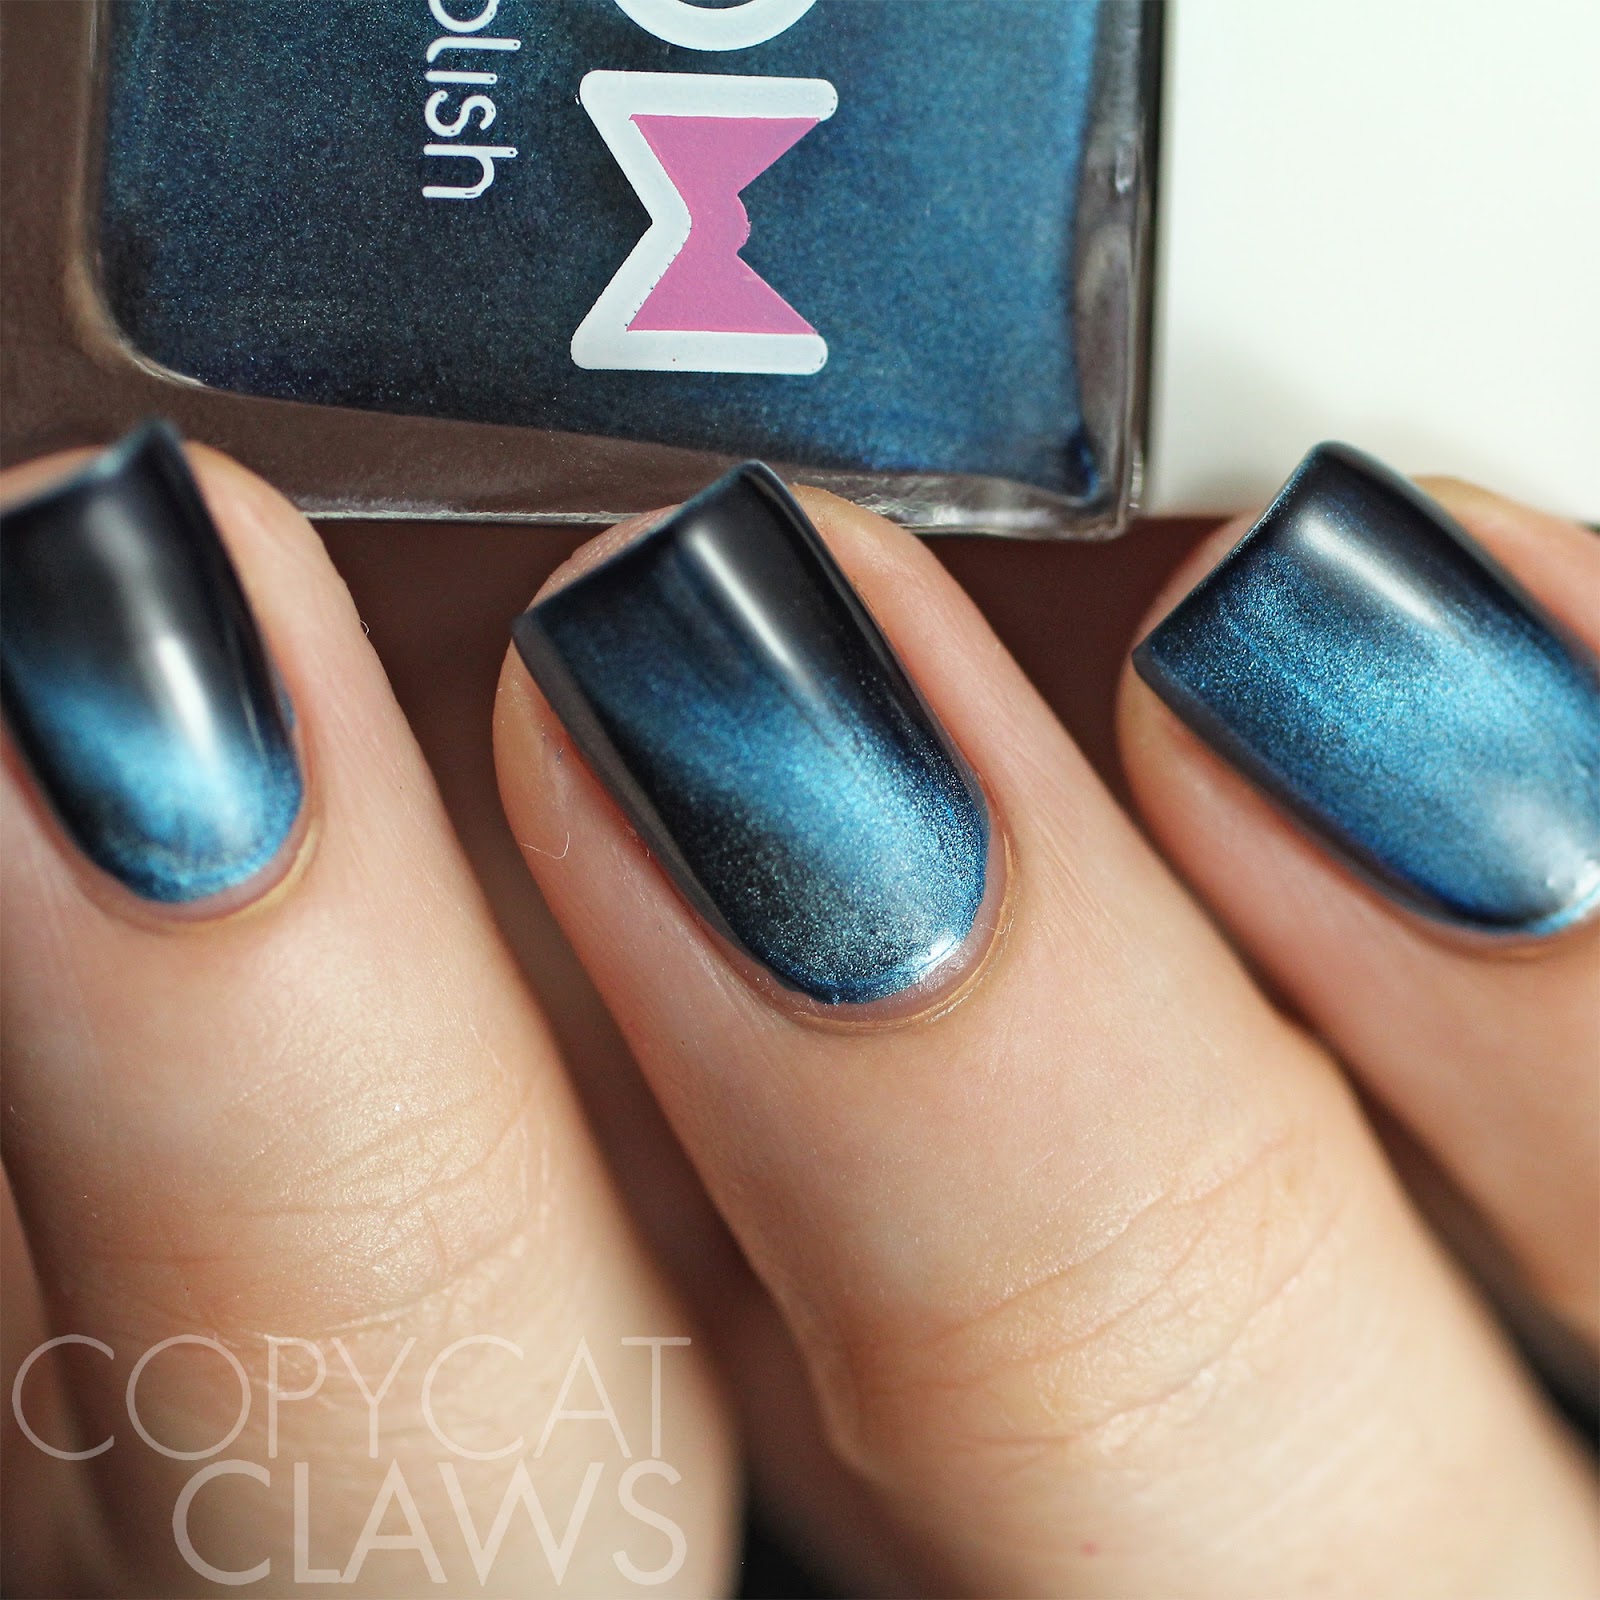 Copycat Claws: Bow Polish Magnetic Swatches